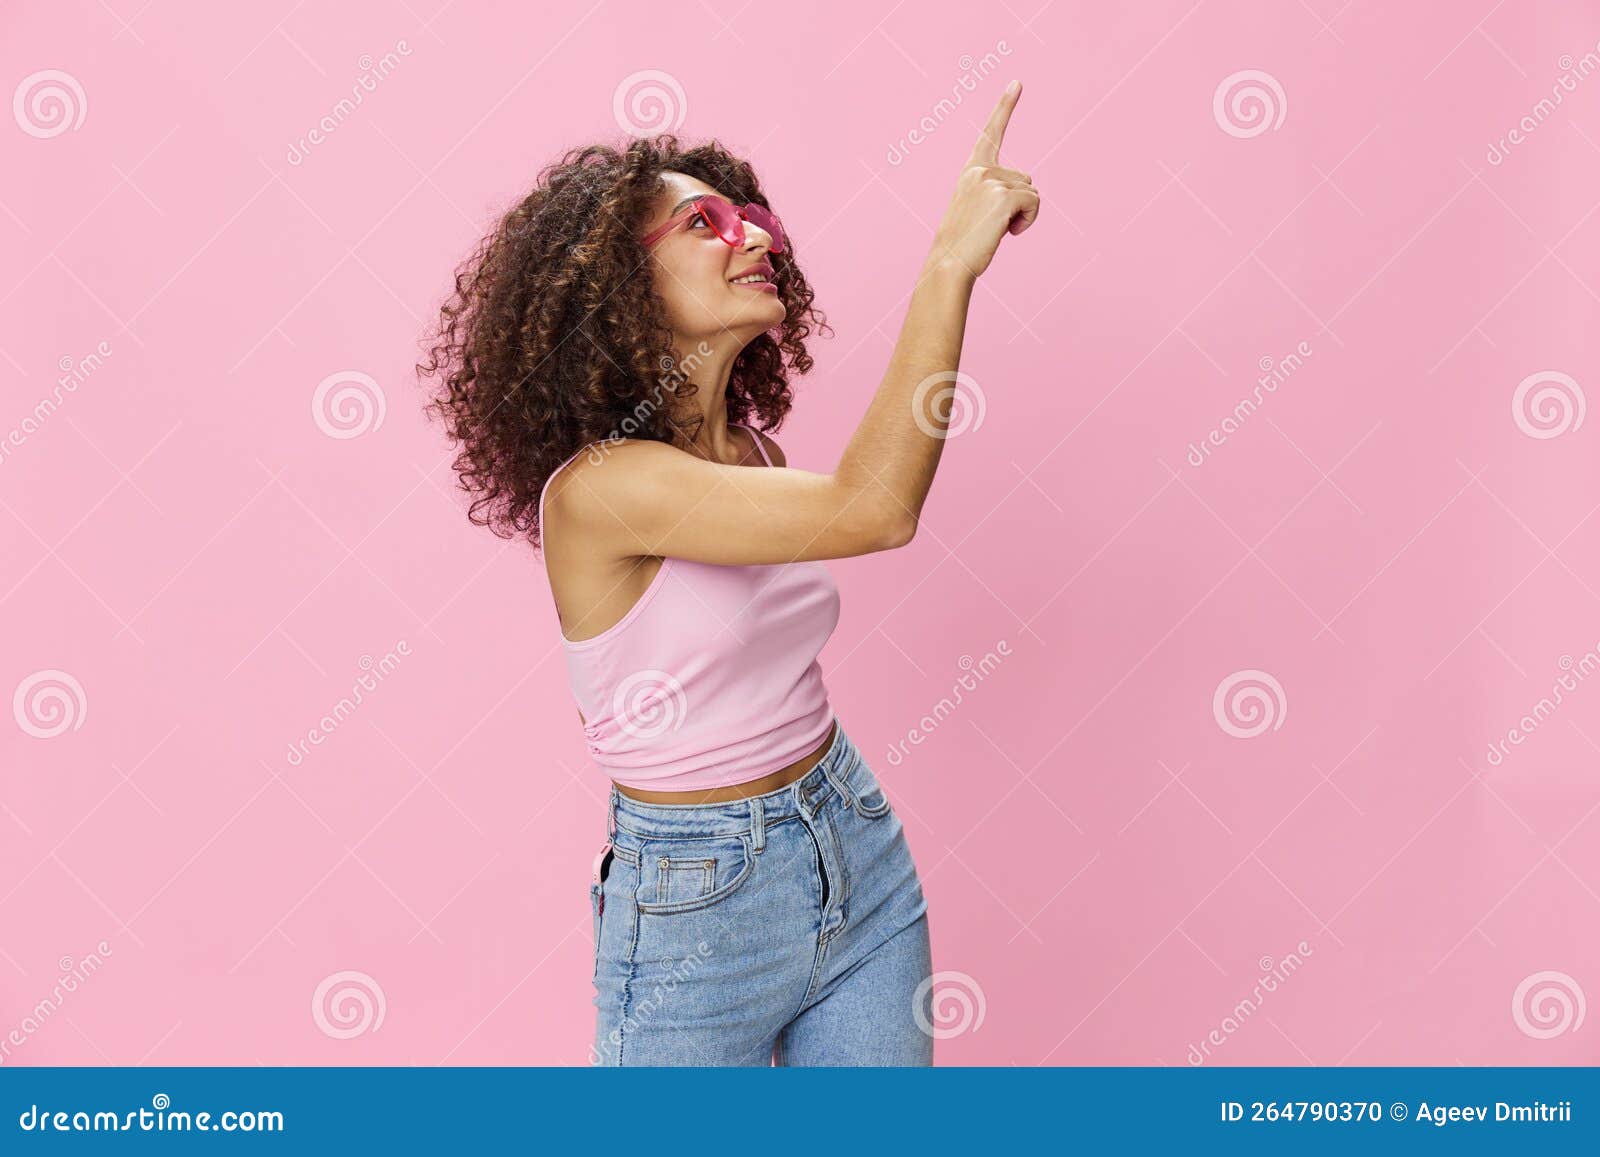 Premium PSD | A embarrassed child girl with long hair from the african  ethnicity dressed in brewer attire poses in a sitting with legs stretched  out style against a pastel coral background